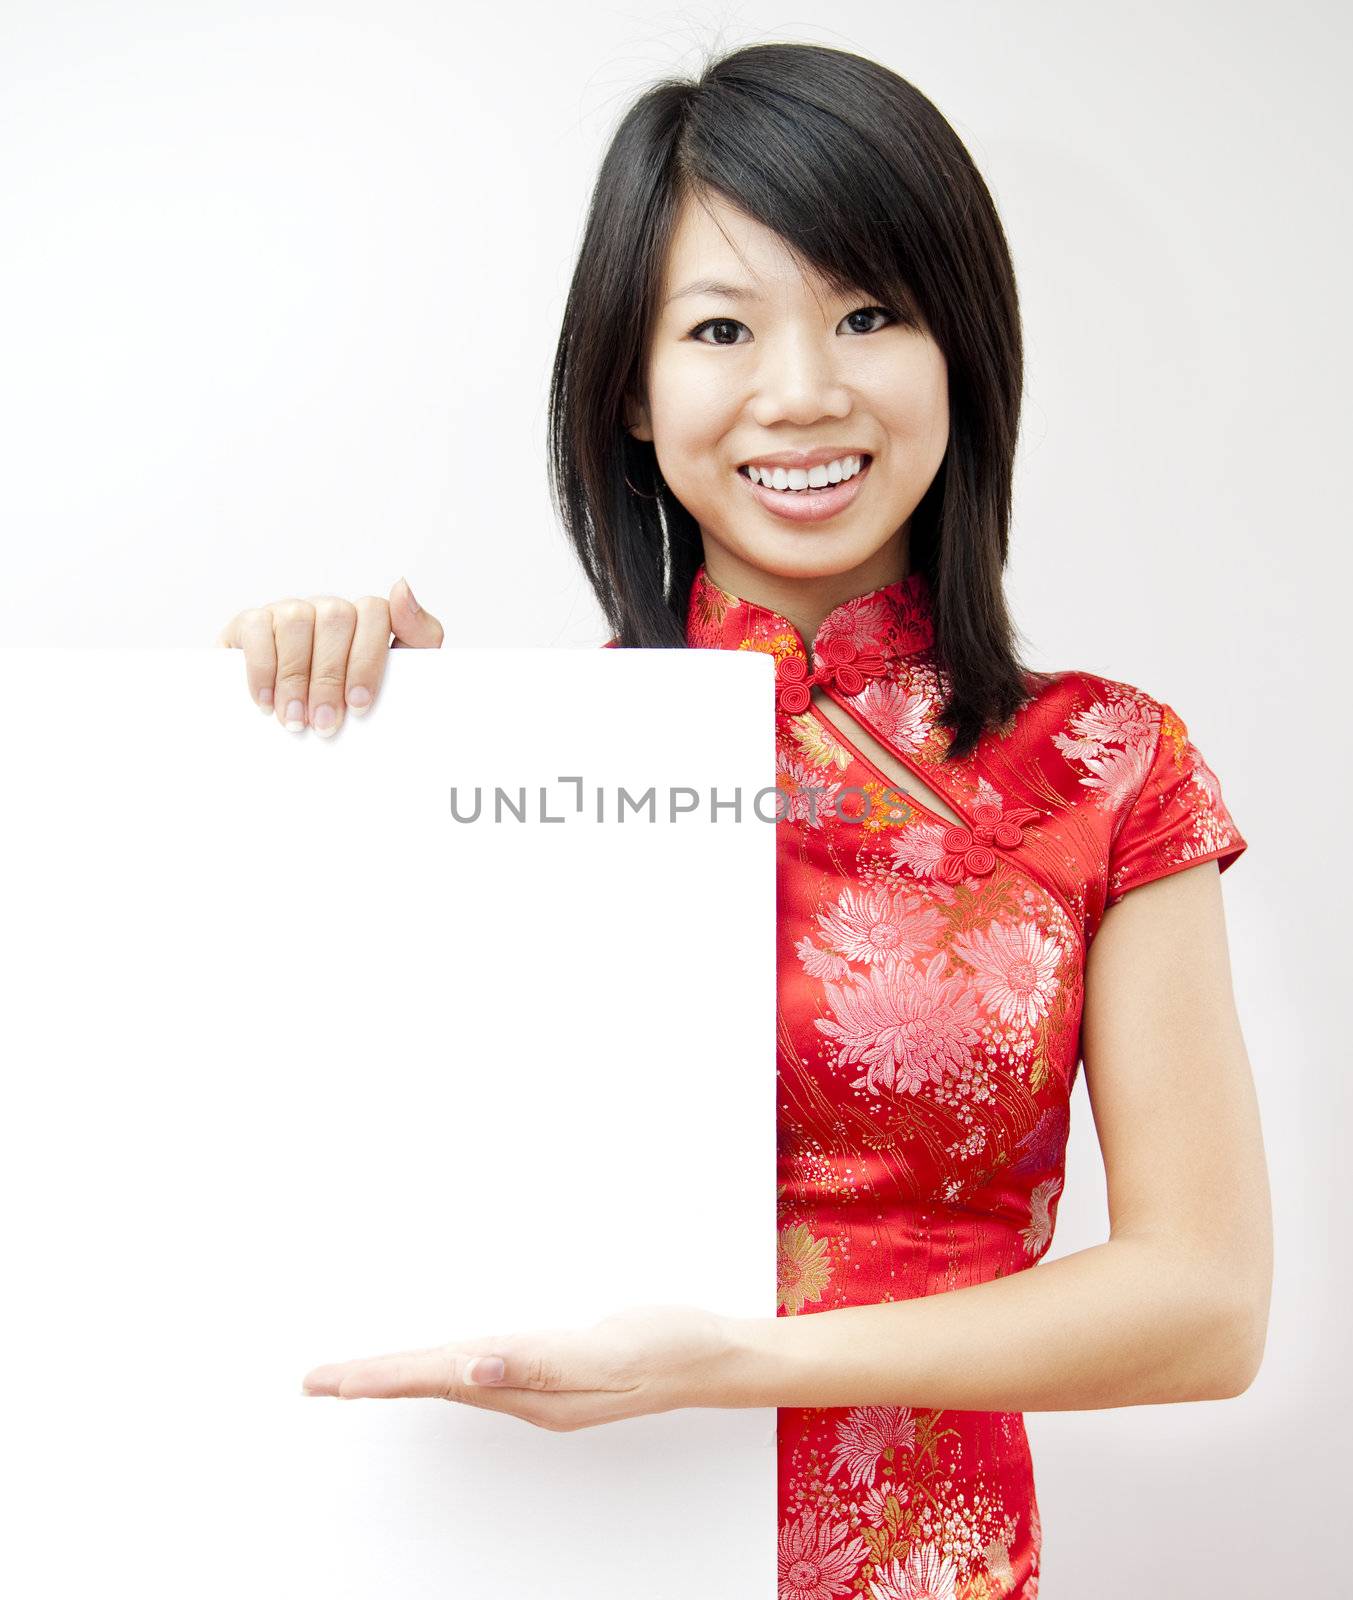 A smiling Oriental girl holding blank sign on grey background